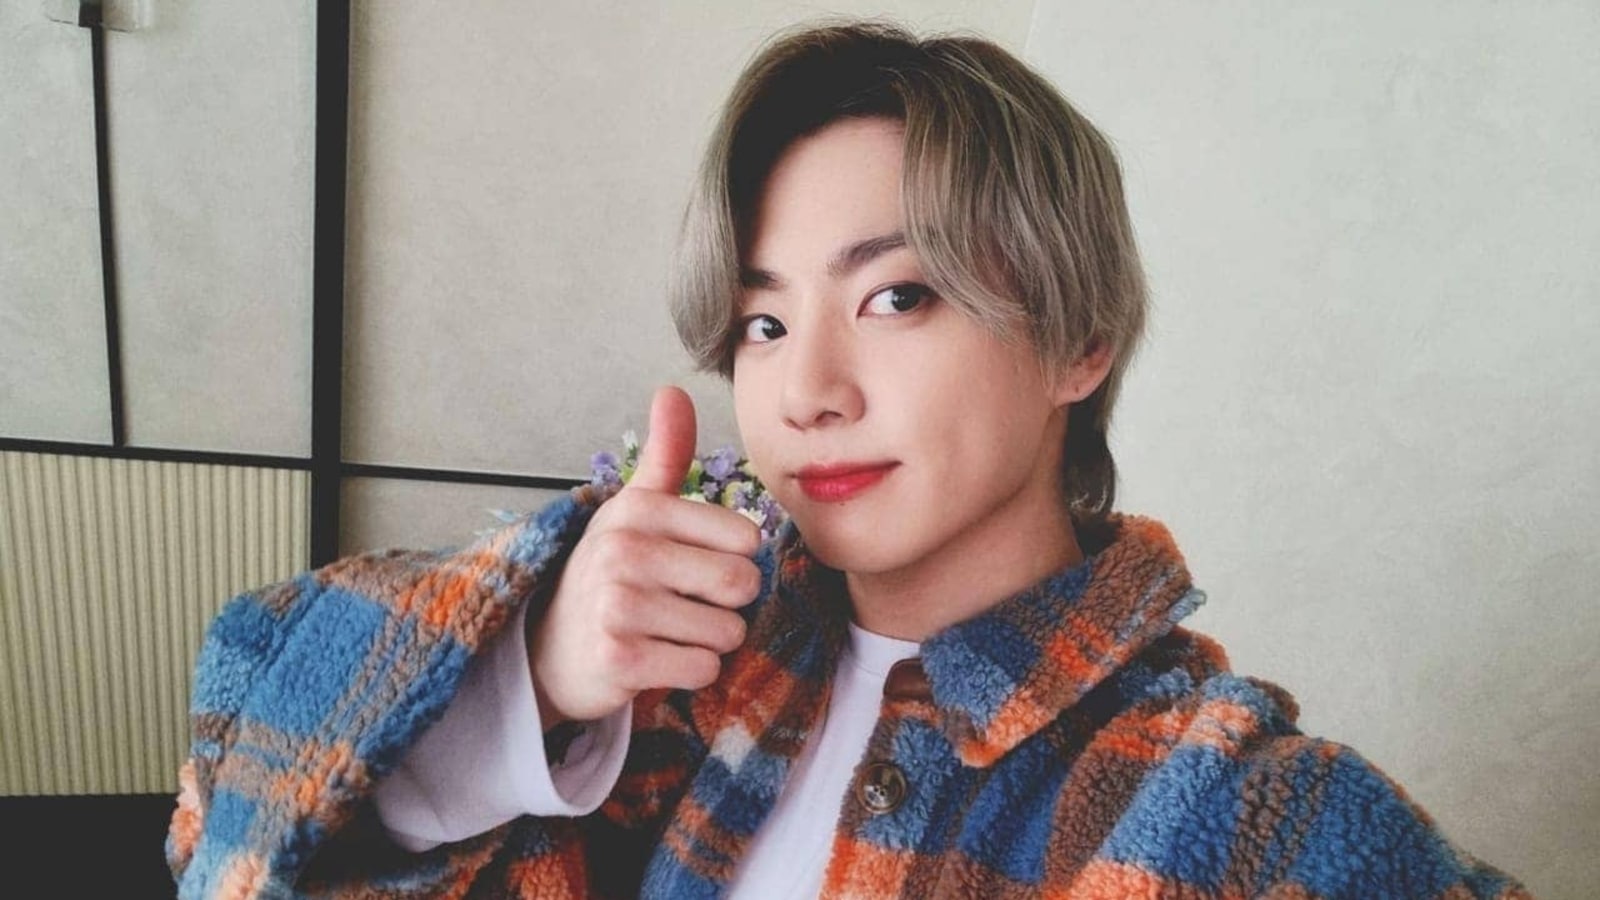 BTS' Jungkook quits Instagram with 51 million followers: 'I just